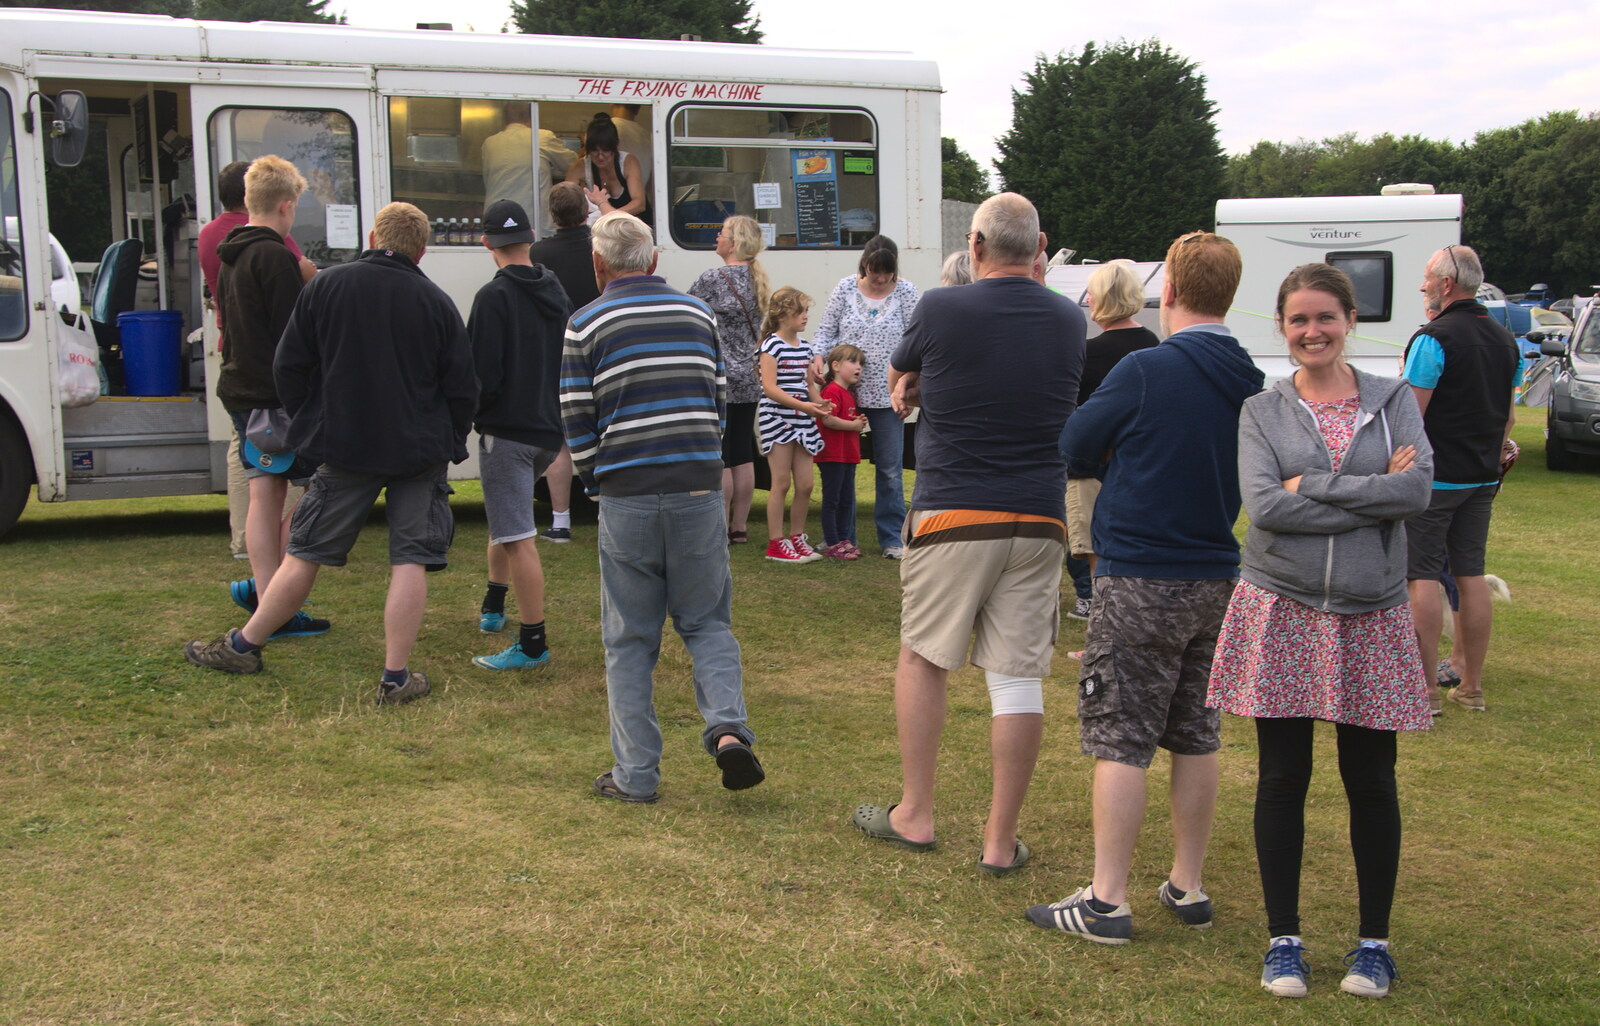 Isobel in the chip queue from Camping in West Runton, North Norfolk - 30th July 2016